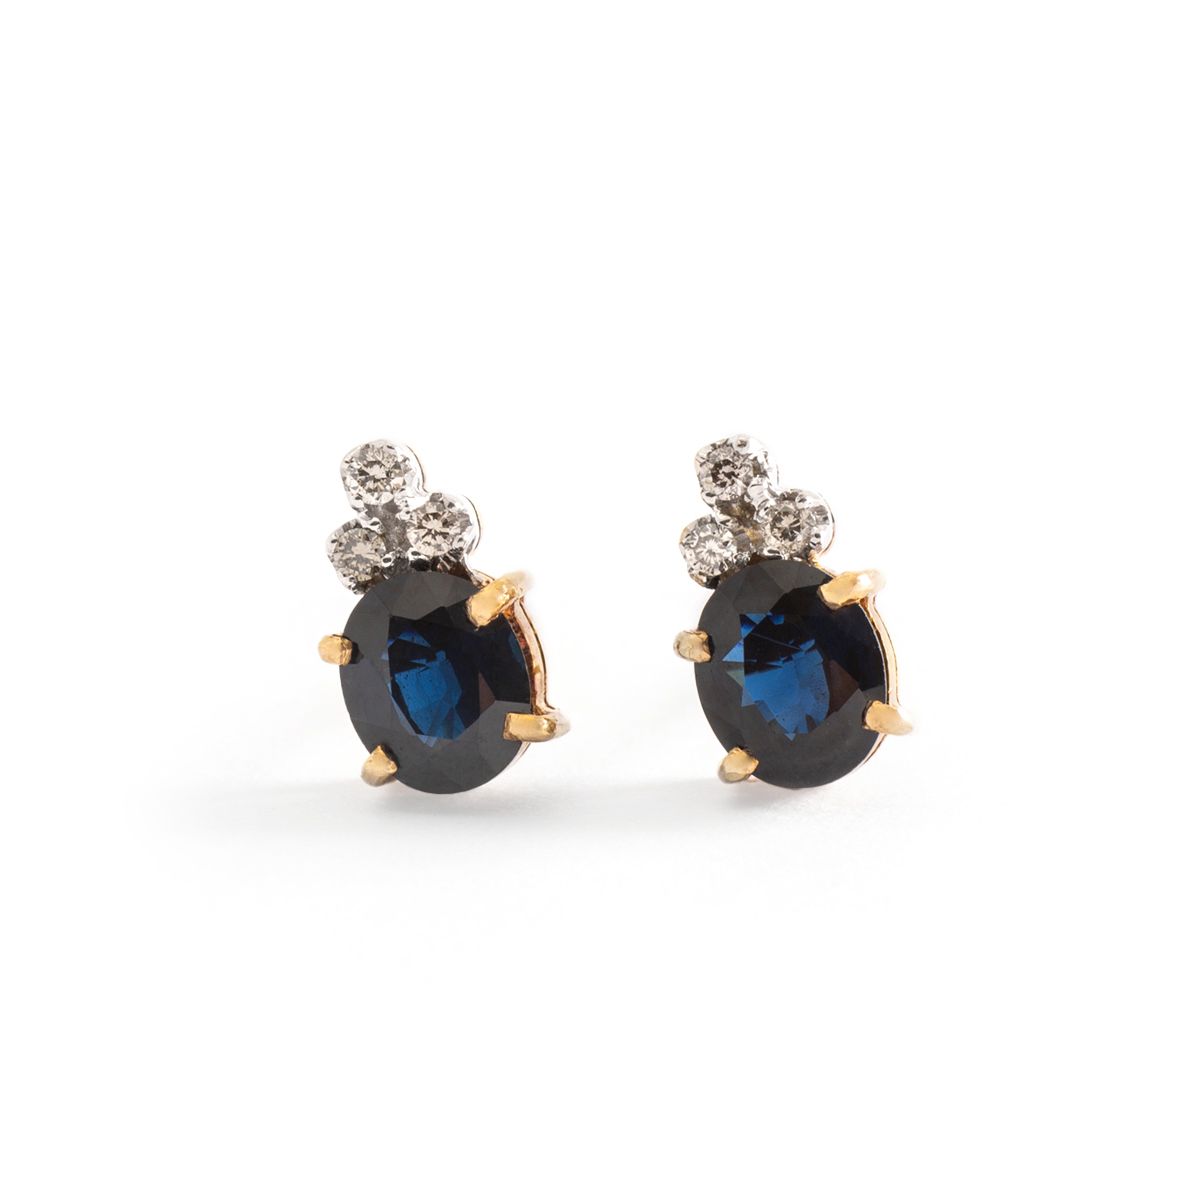 Null Earrings in 18 ct yellow gold, each set with a claw-set oval sapphire (heig&hellip;